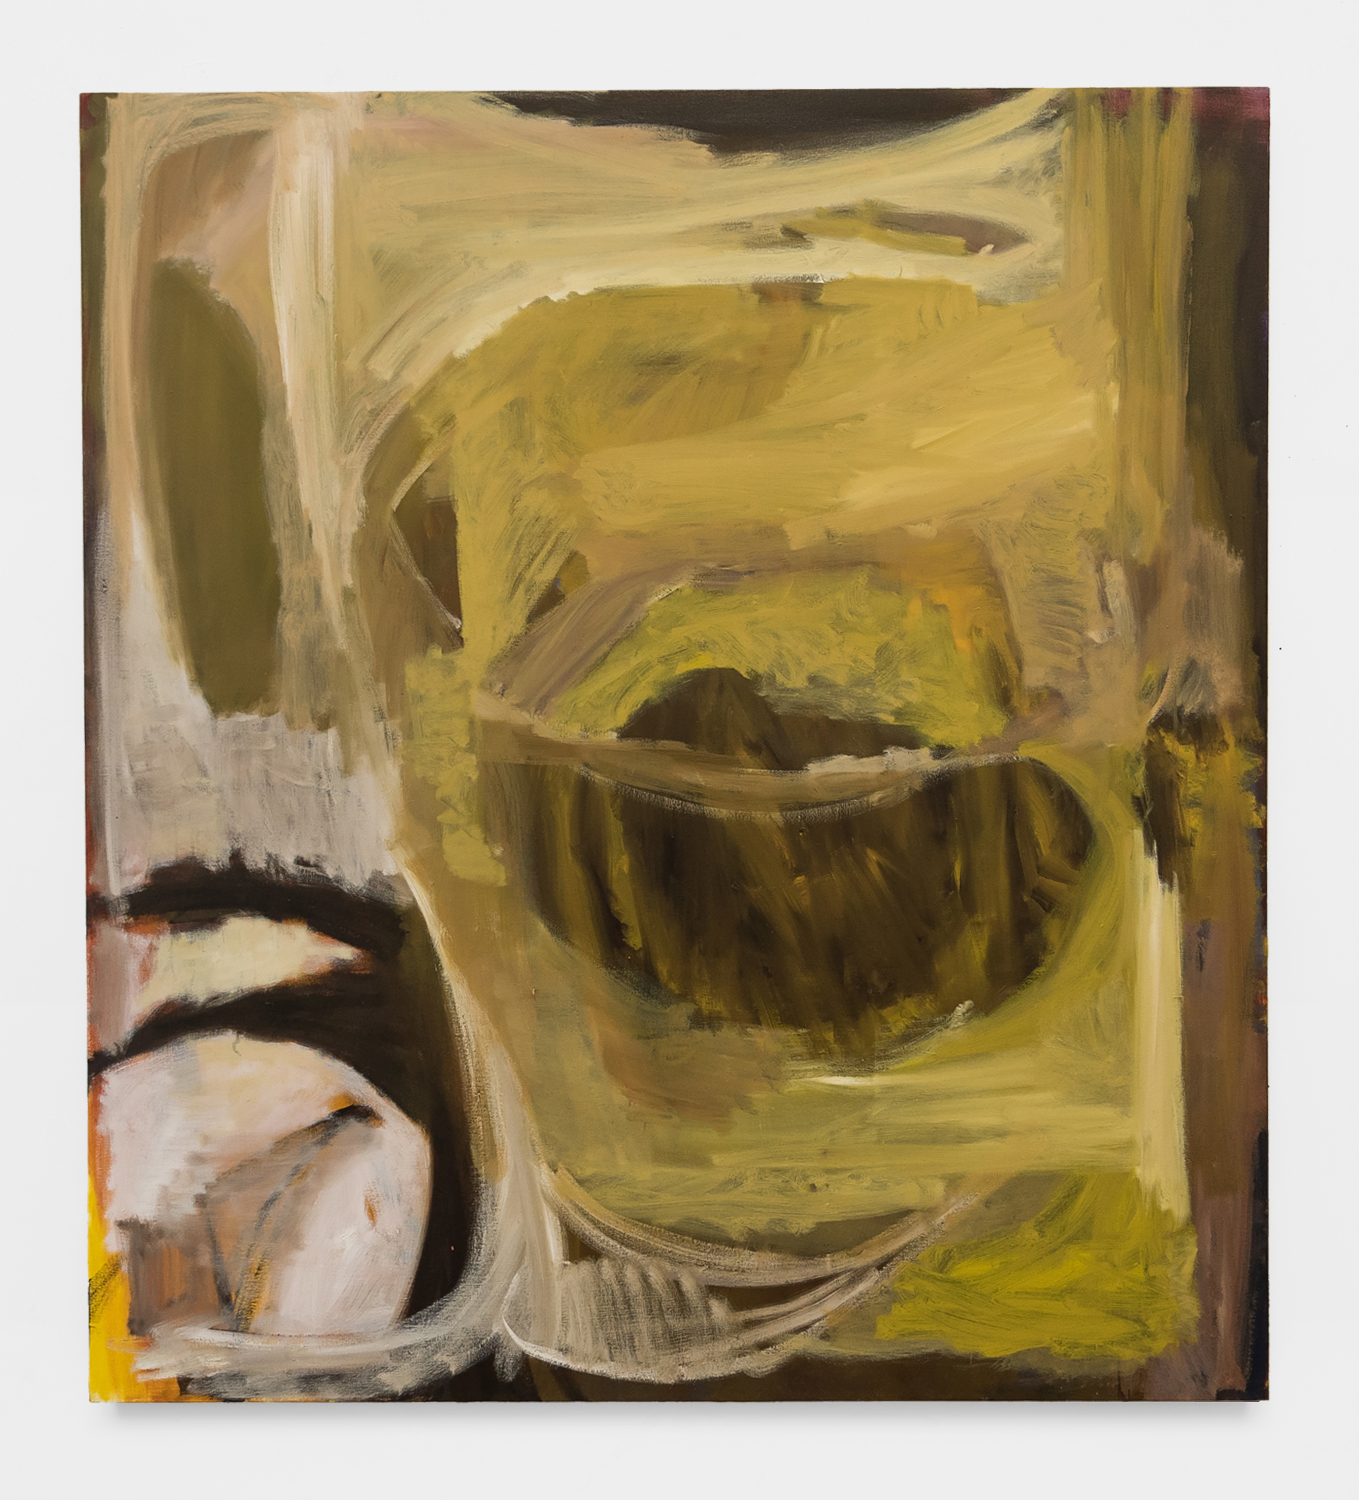 Liza Lacroix, Man One, Man Two, 2021, Oil on canvas, 66h x 60w in.